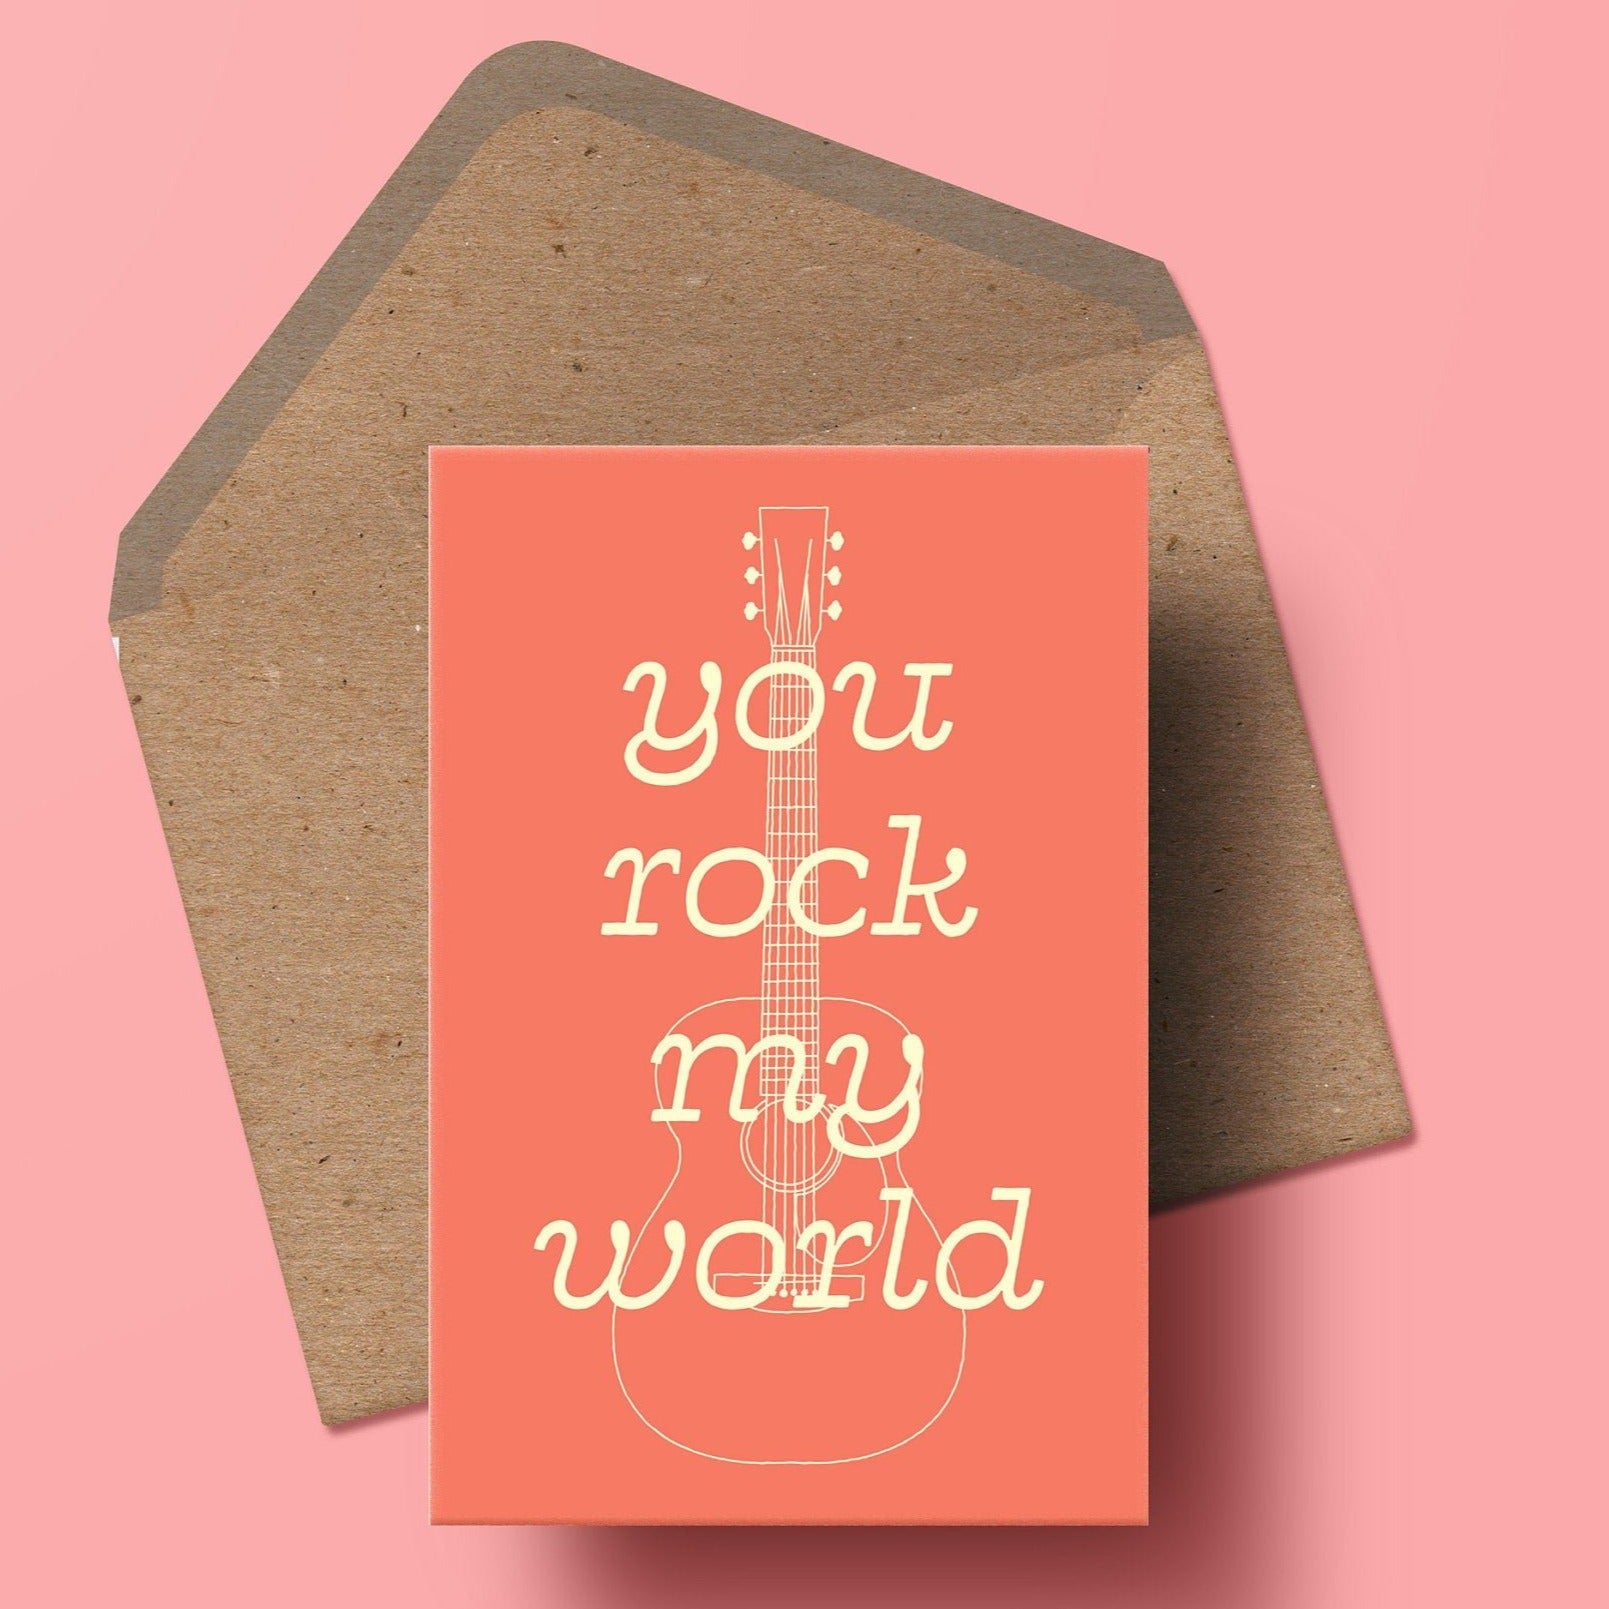 image of a greetings card featuring the words you rock my world in cream overlaid onto an illustration of an acoustic guitar also in cream. the background is a muted coral colour. beneath the card is a kraft envelope.